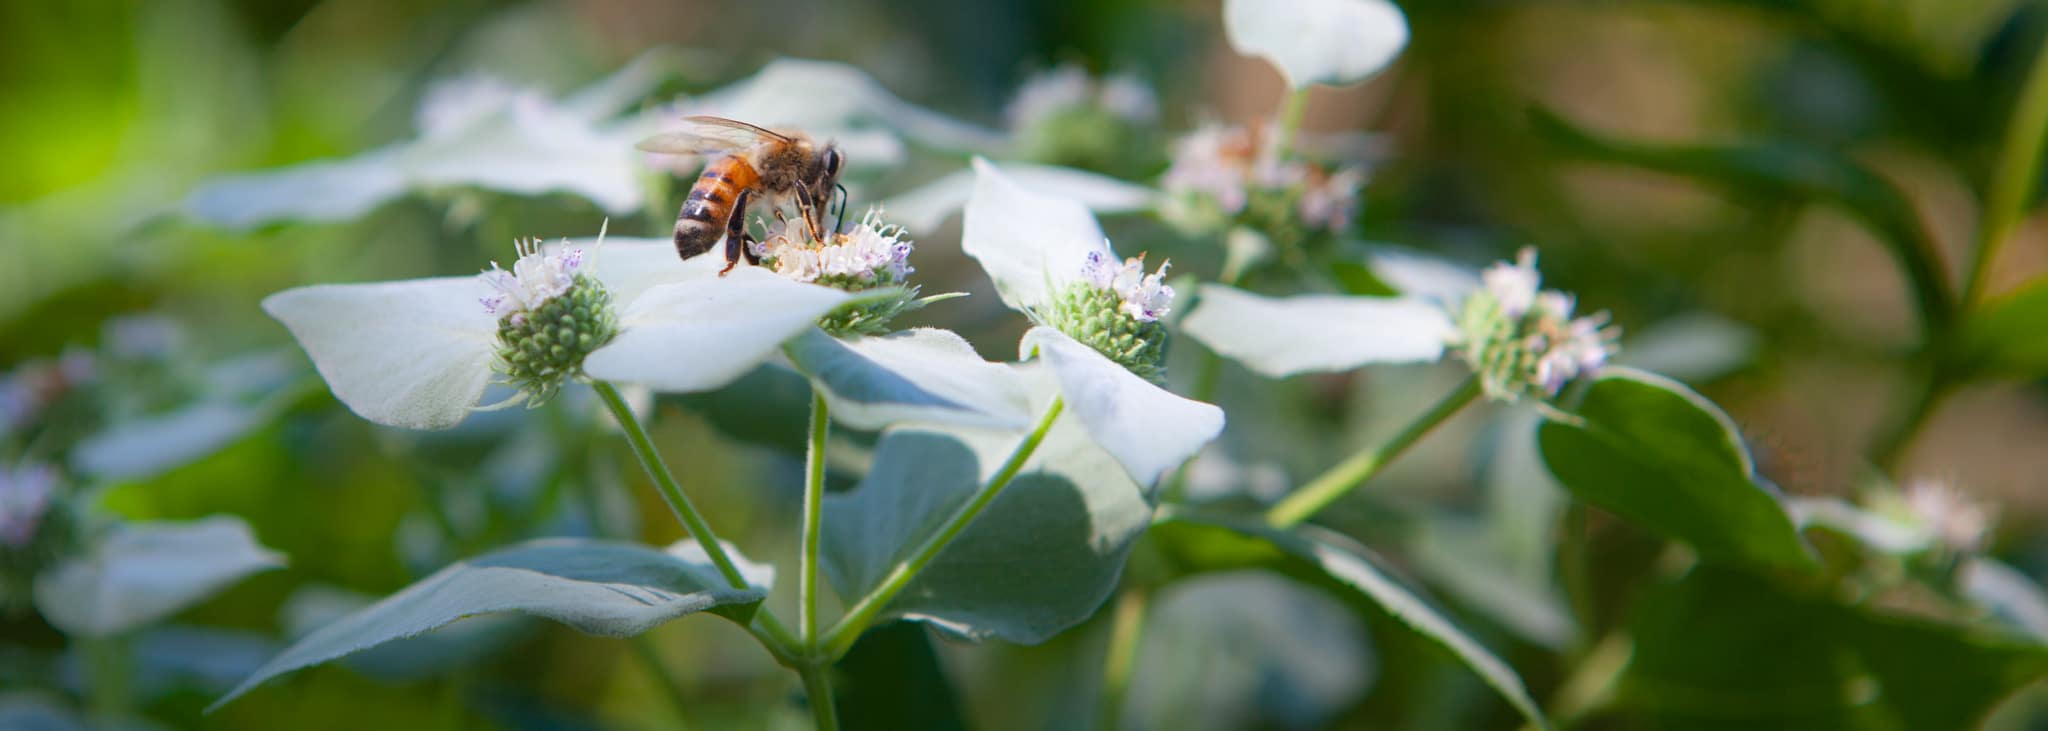 Photo of a honey bee on flower